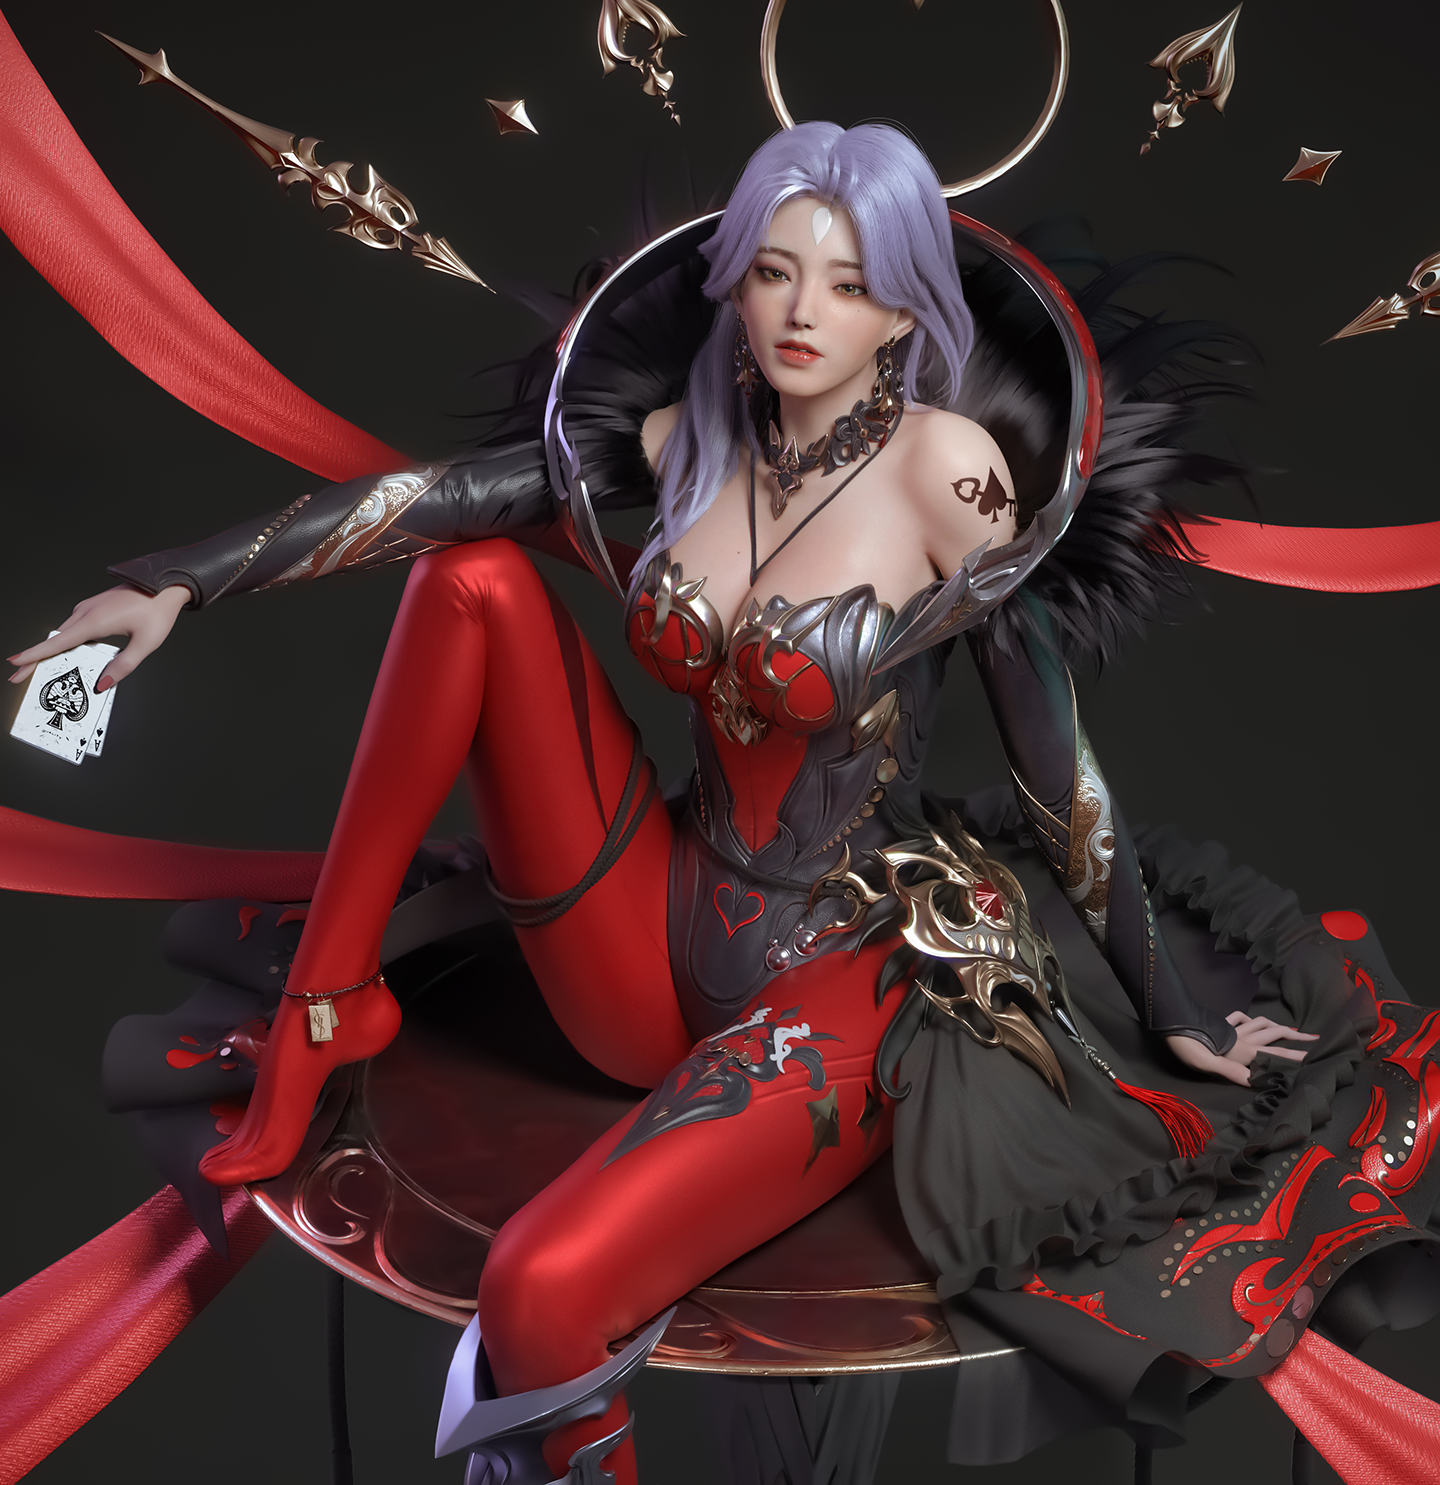 Cifangyi CGi Purple Hair Looking Away Dress Red Clothing Cards Aces Red Anklet Jewelry 1440x1485